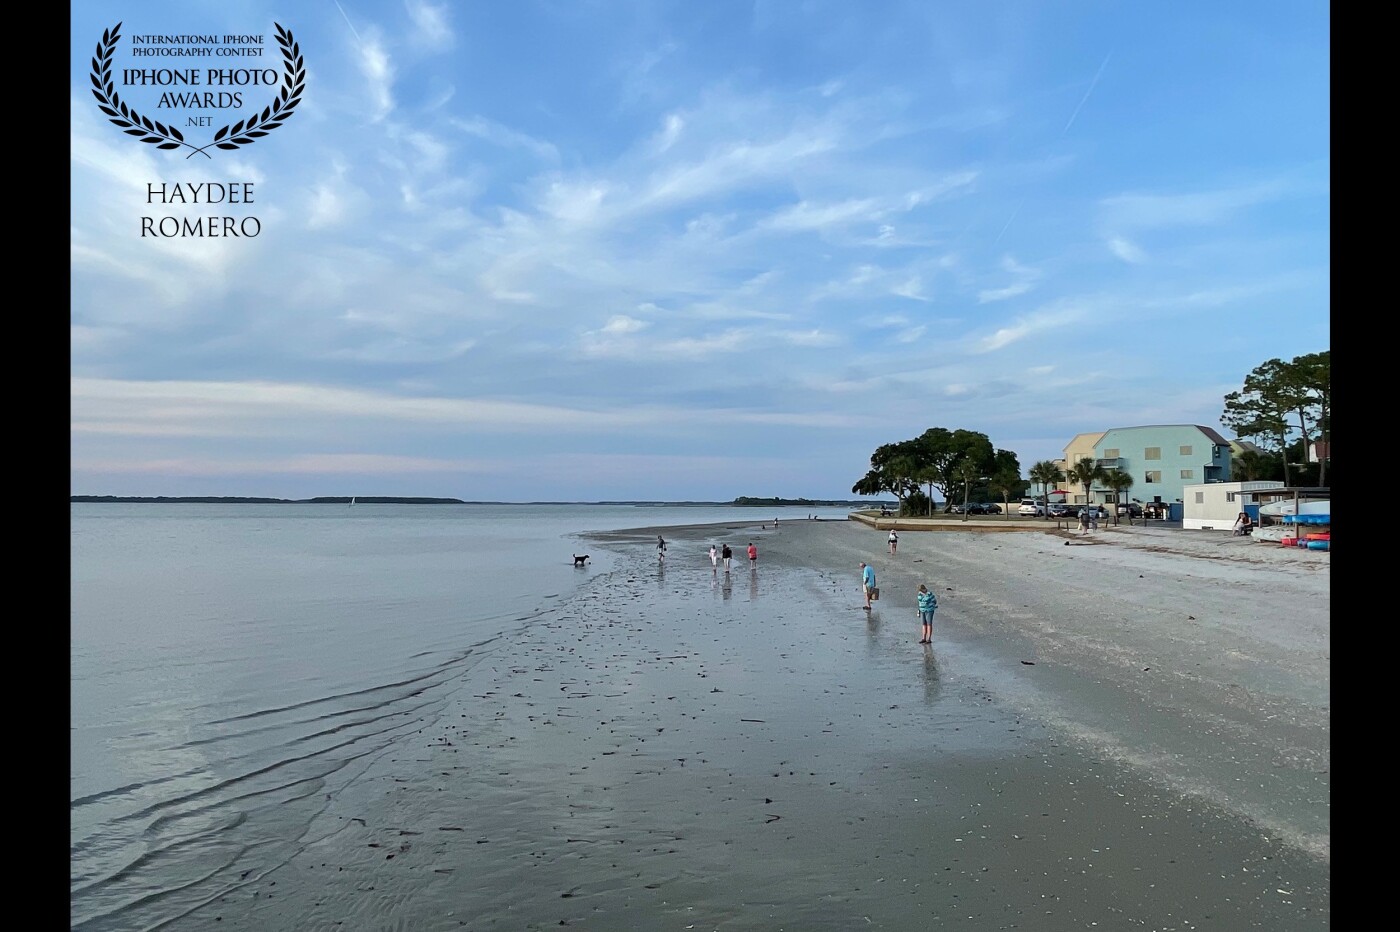 This is the small beach by the lighthouse at Harbor Town in Hilton Head Island, where holidaymakers and travelers come to watch the sunset and to stroll along the sand where the receding leaves a treasure trove of seashells and marine life.